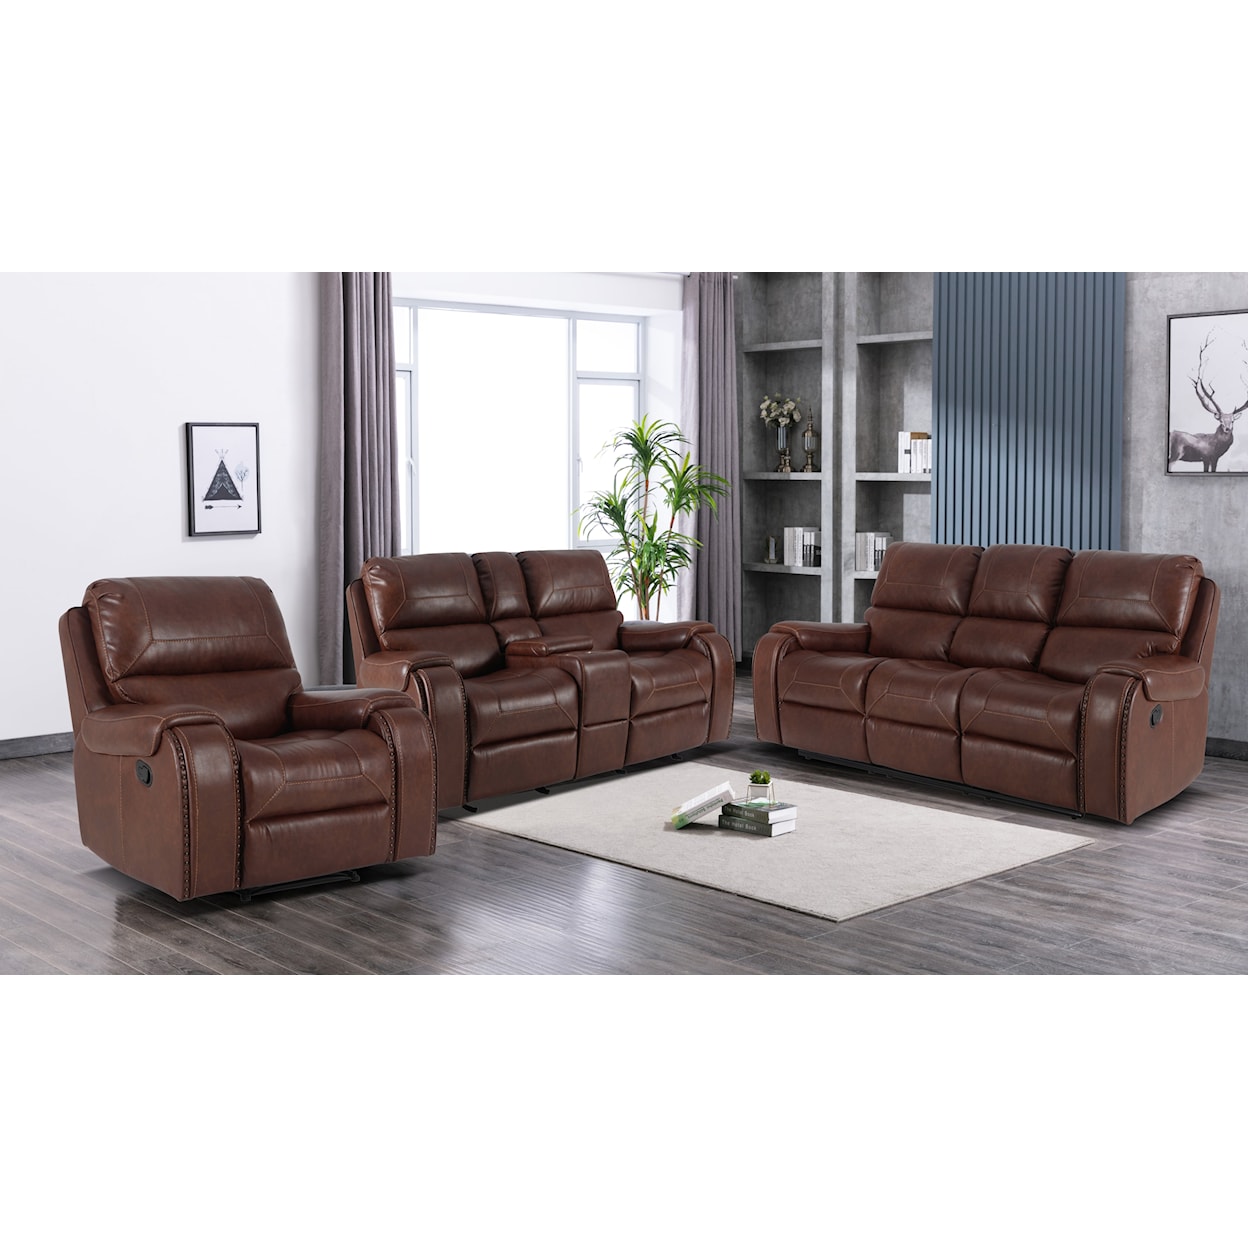 Stanbrook Home Keily Recliner